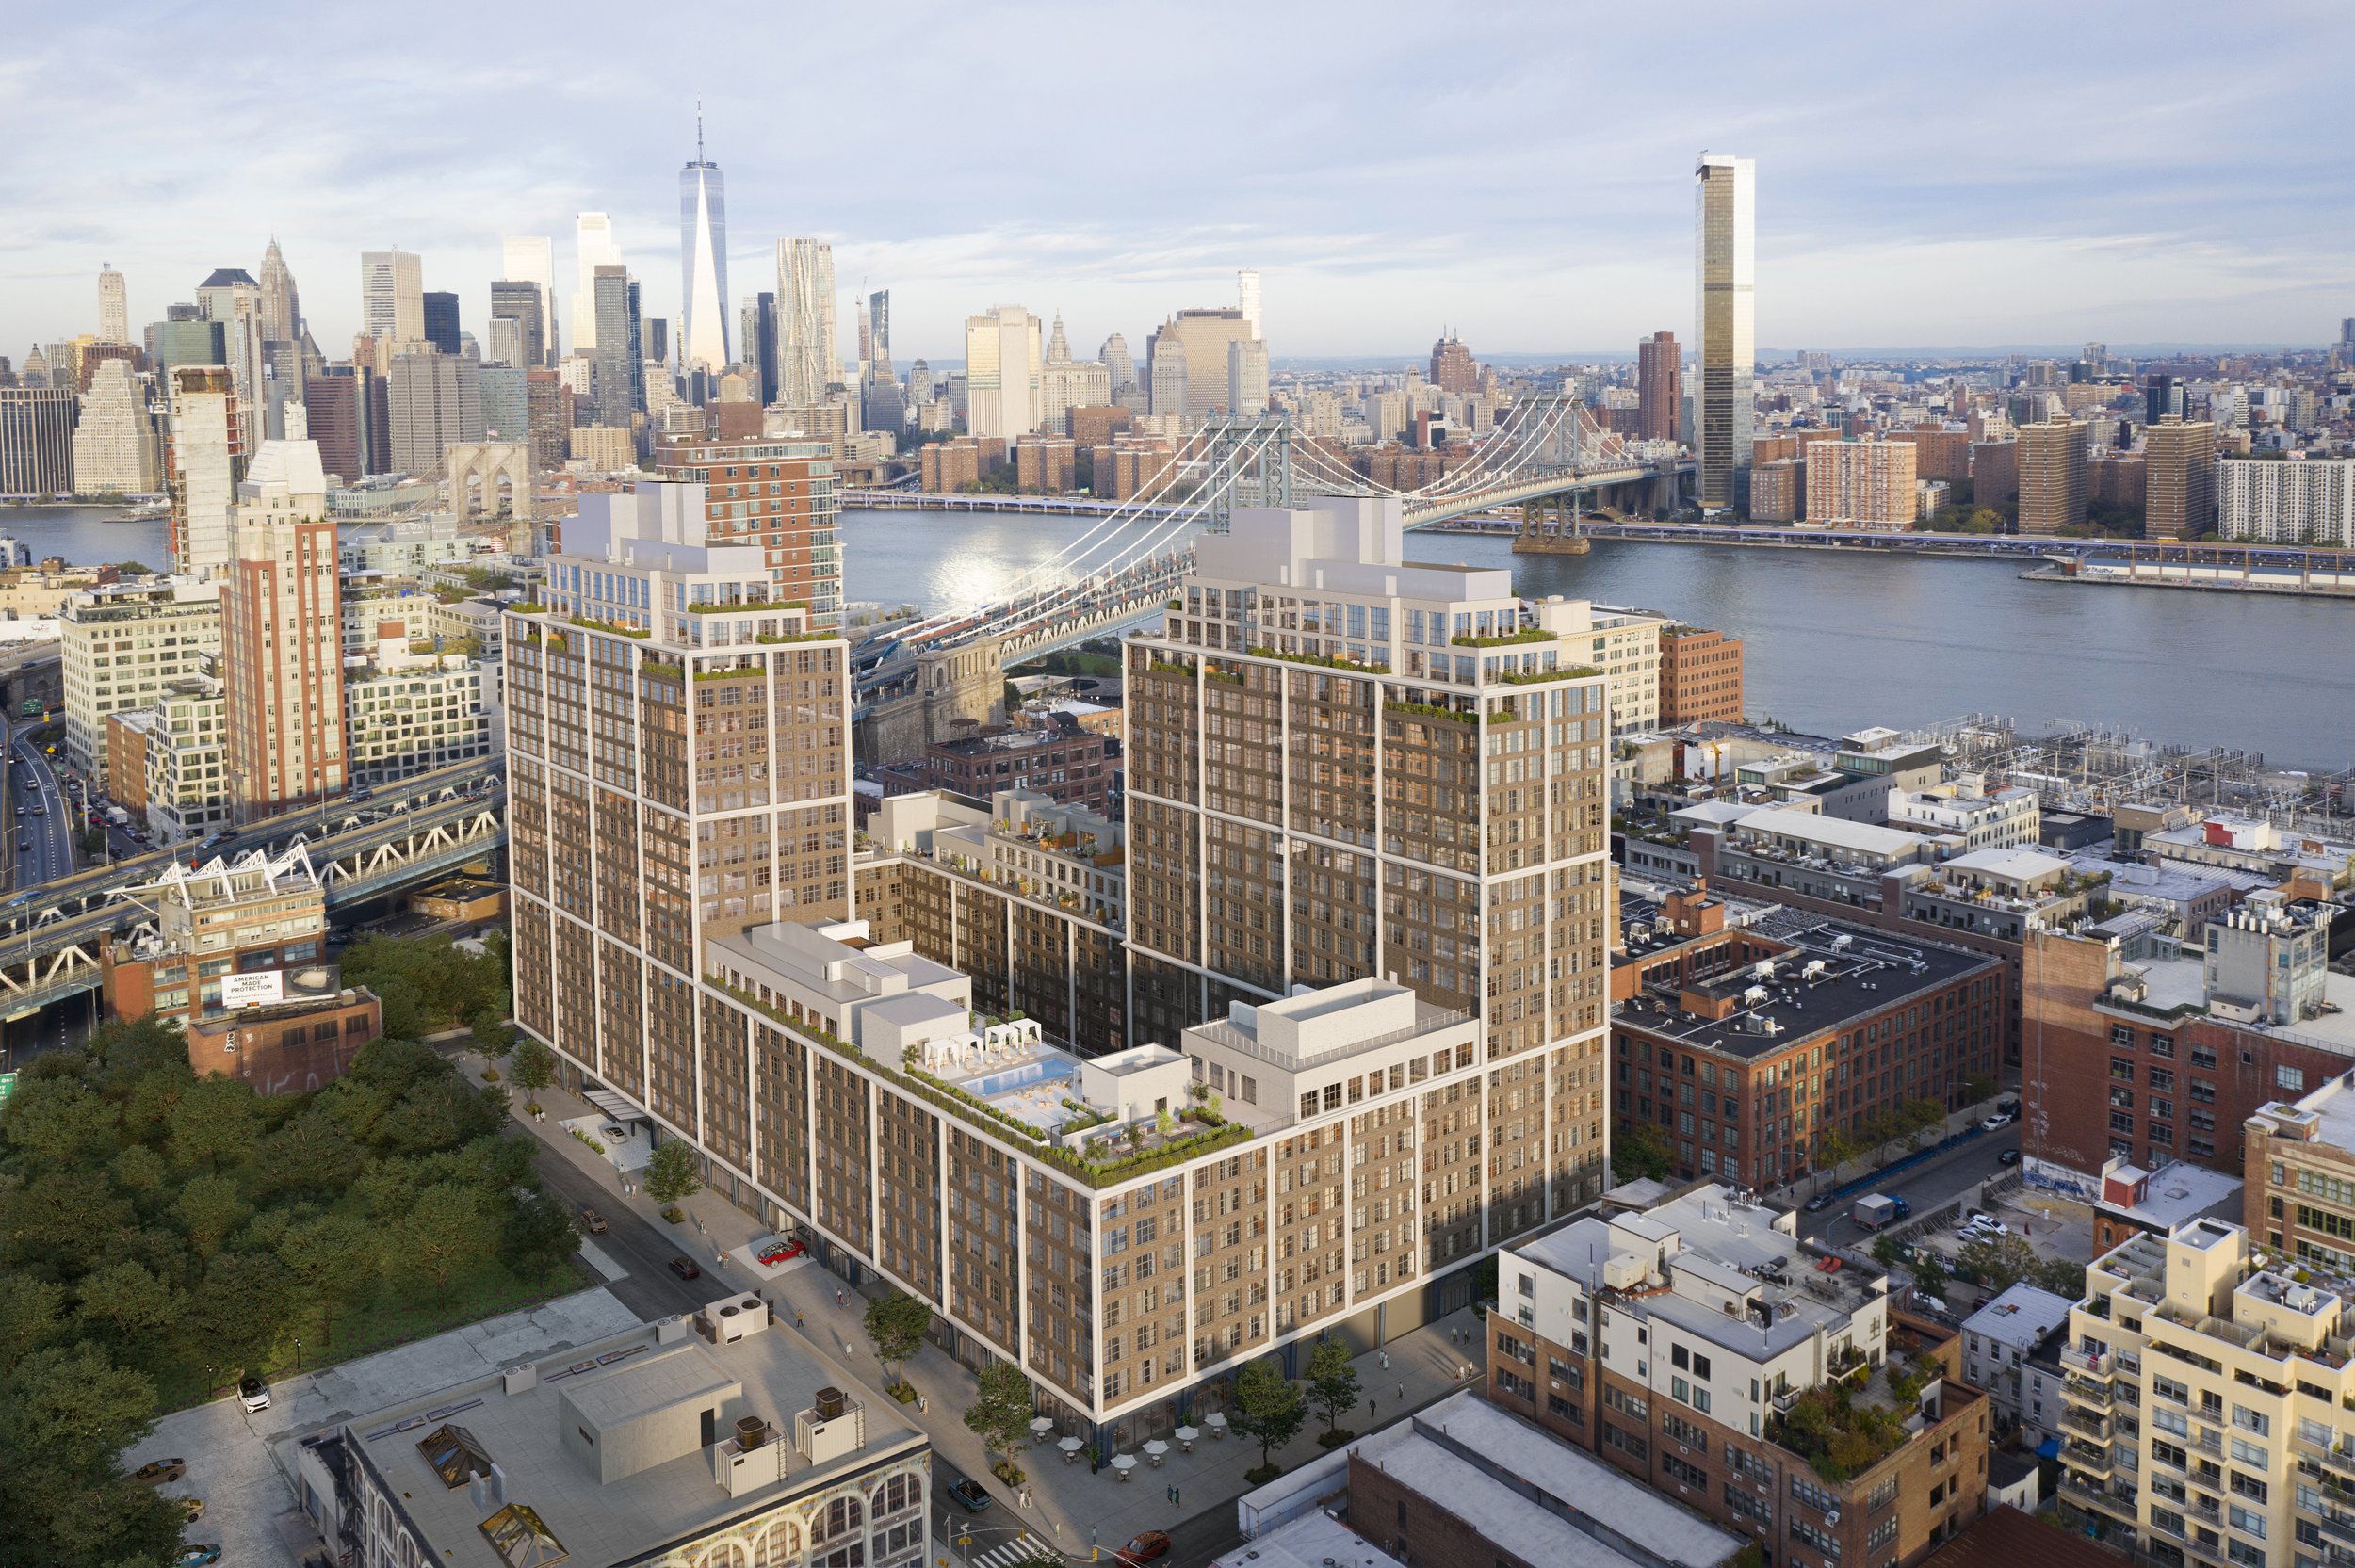  Last week was the launch of the luxurious, amenity-rich rentals at  Magnolia DUMBO  today, launching in the midst of one of the hottest rental markets in recent NYC history.     Who doesn’t want to live in DUMBO, Brooklyn? But if you’re renting, it 